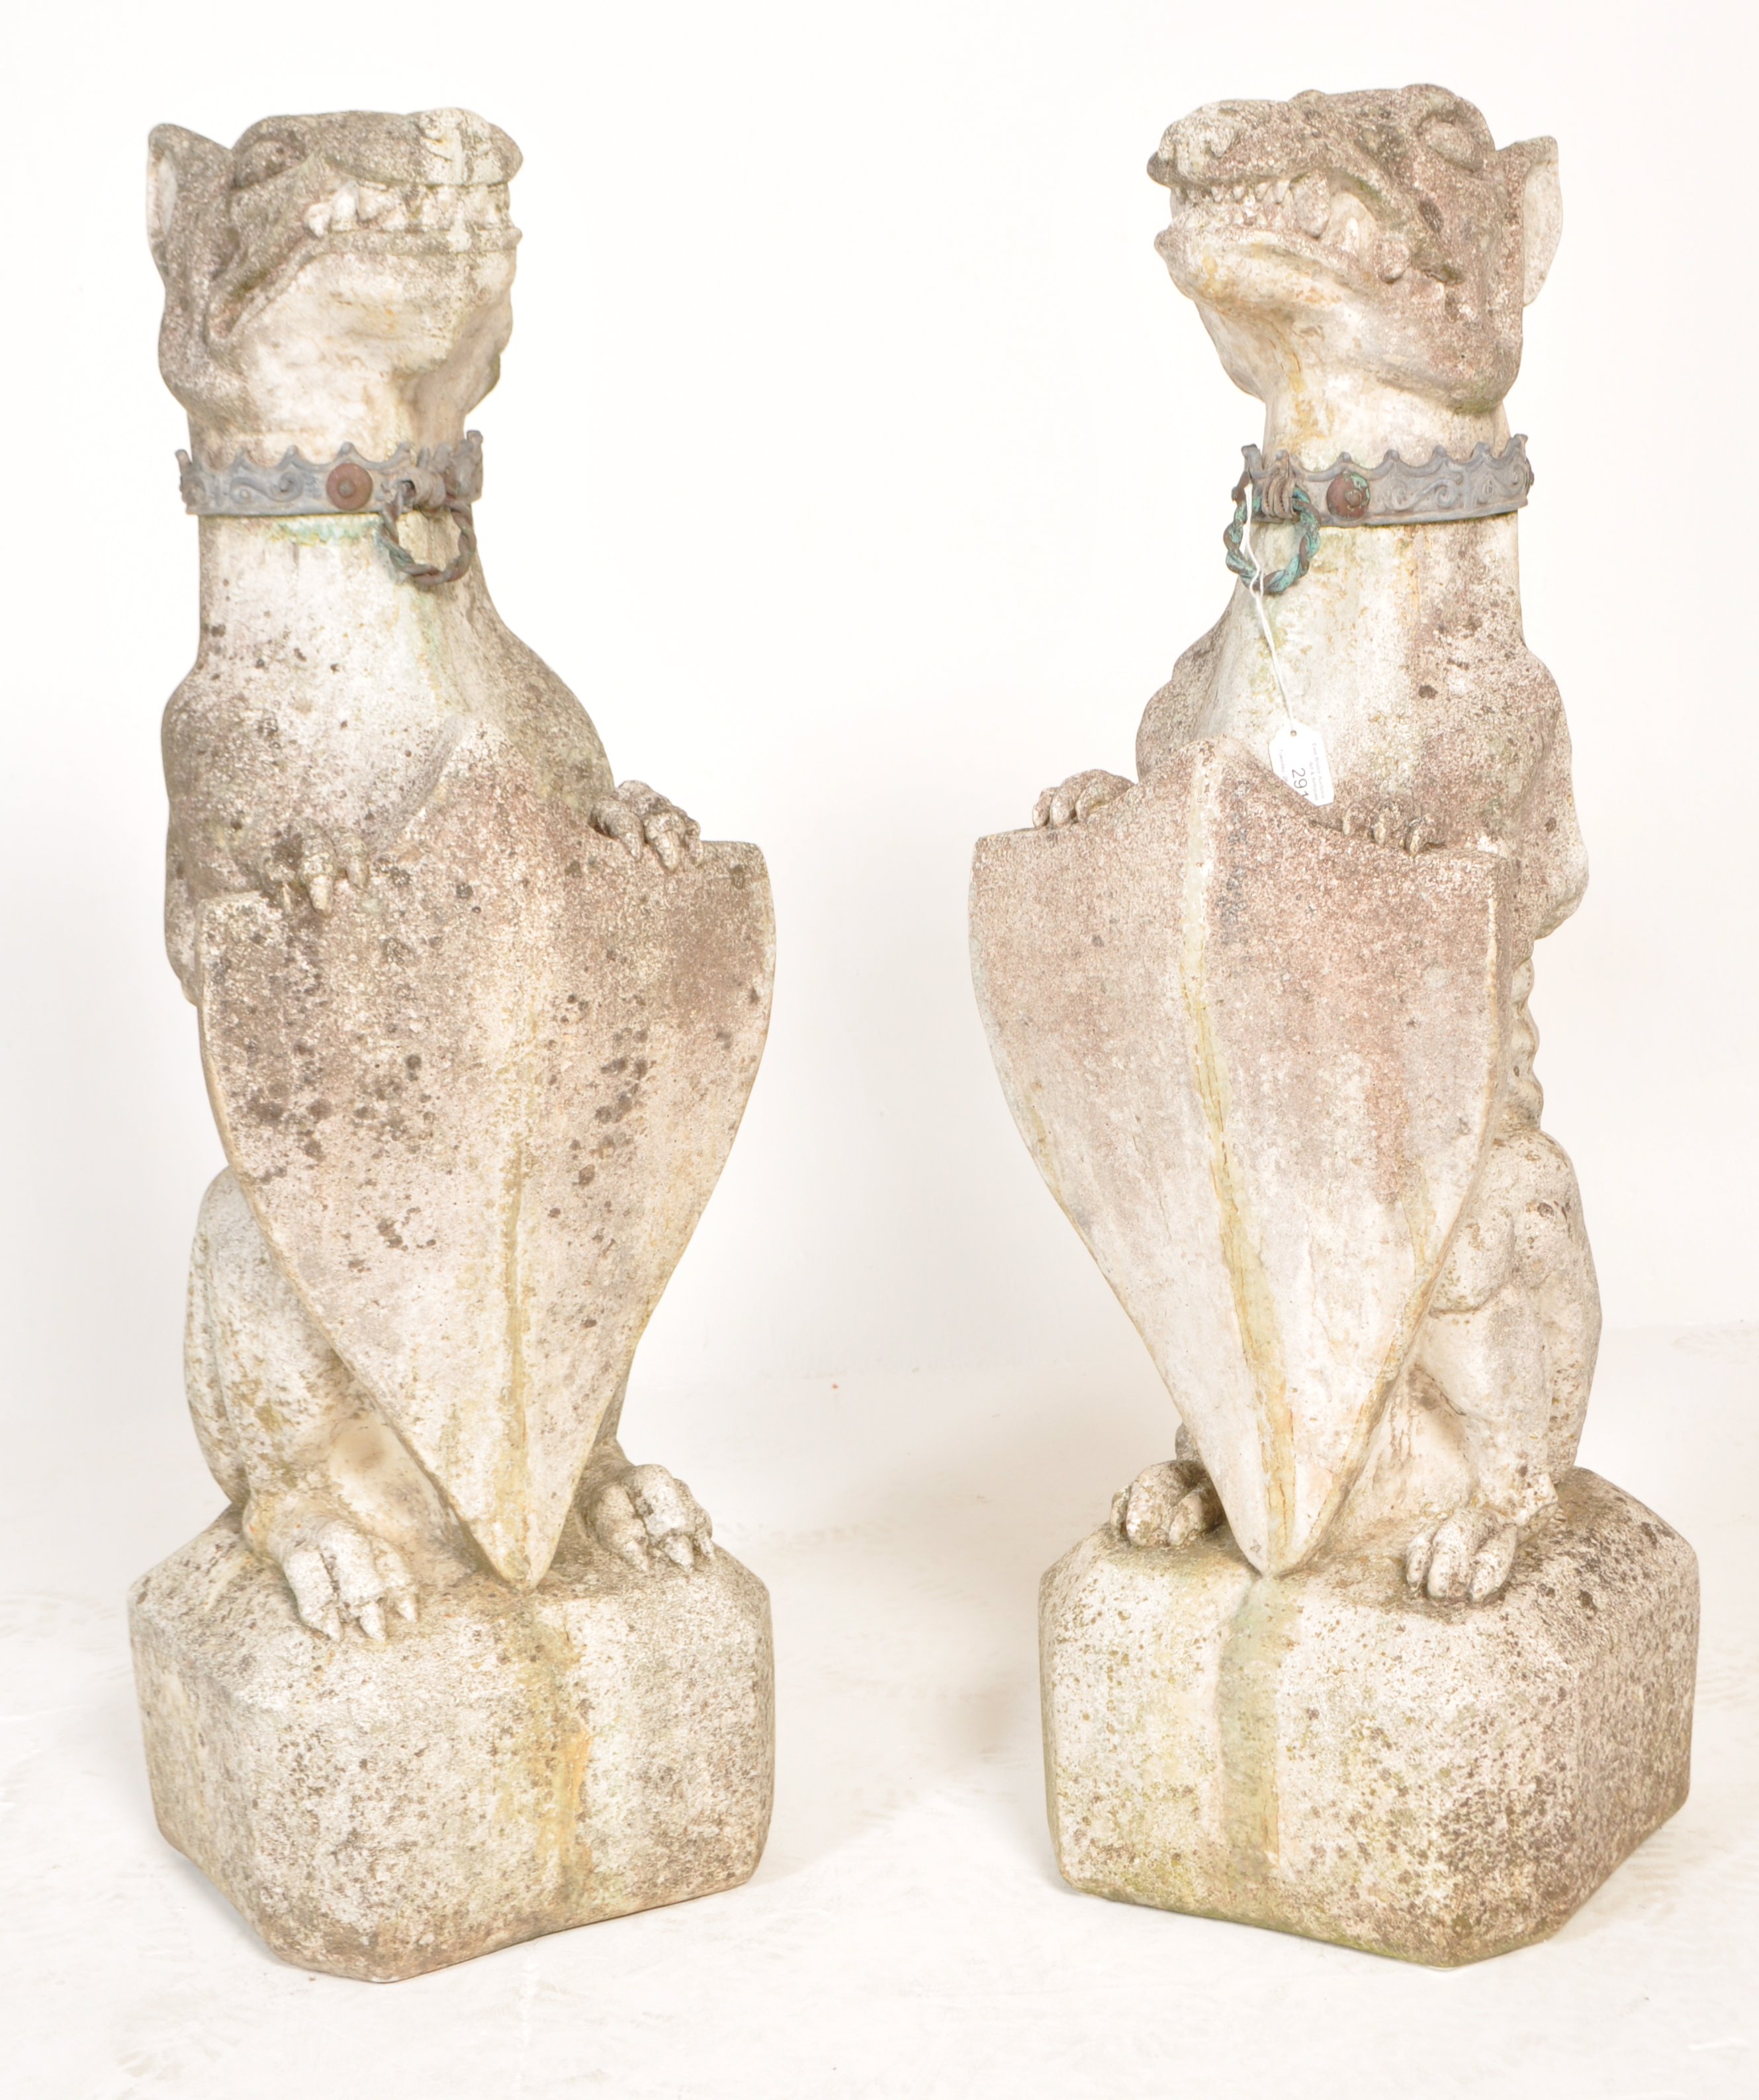 PAIR WEATHERED 20TH CENTURY STONE GROTESQUE GARDEN STATUE DOGS